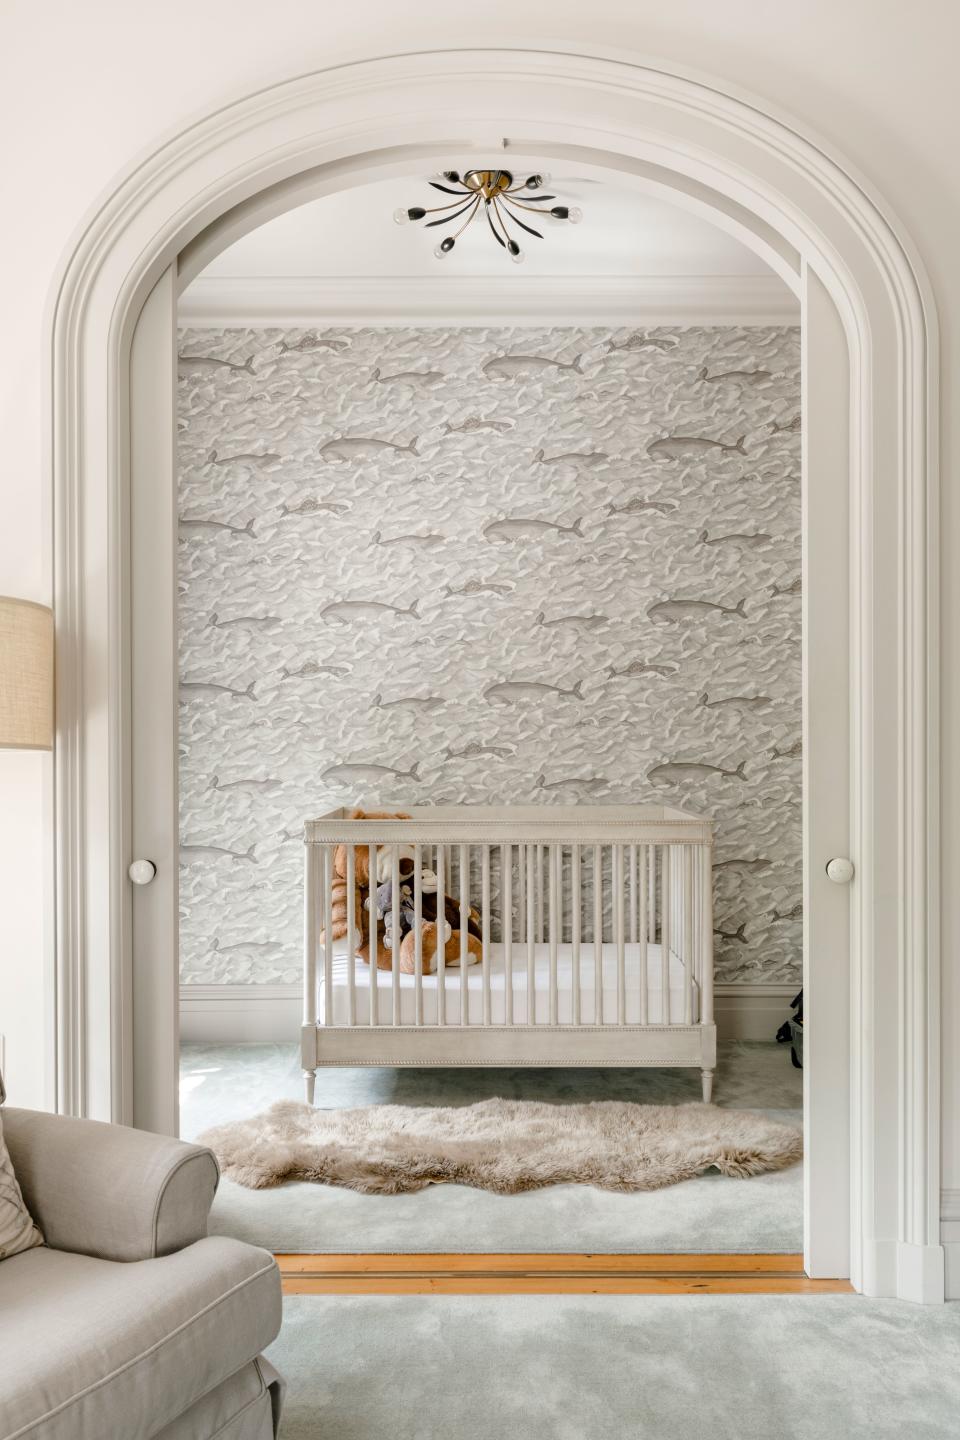 This nursery was designed for her son Sailor, who is now four years old. “We moved [to London] when Lula was only six weeks, so she was still in her little bassinet,” says Tyler. “Now they both kind of use this room, depending on the trip, and who is traveling with me. Sometimes Sailor will still sleep in the crib, and sometimes [Lula] sleeps in the bed with me.” The whale of a wallpaper is the Melville pattern in black and white, from Cole & Son’s Whimsical collection.